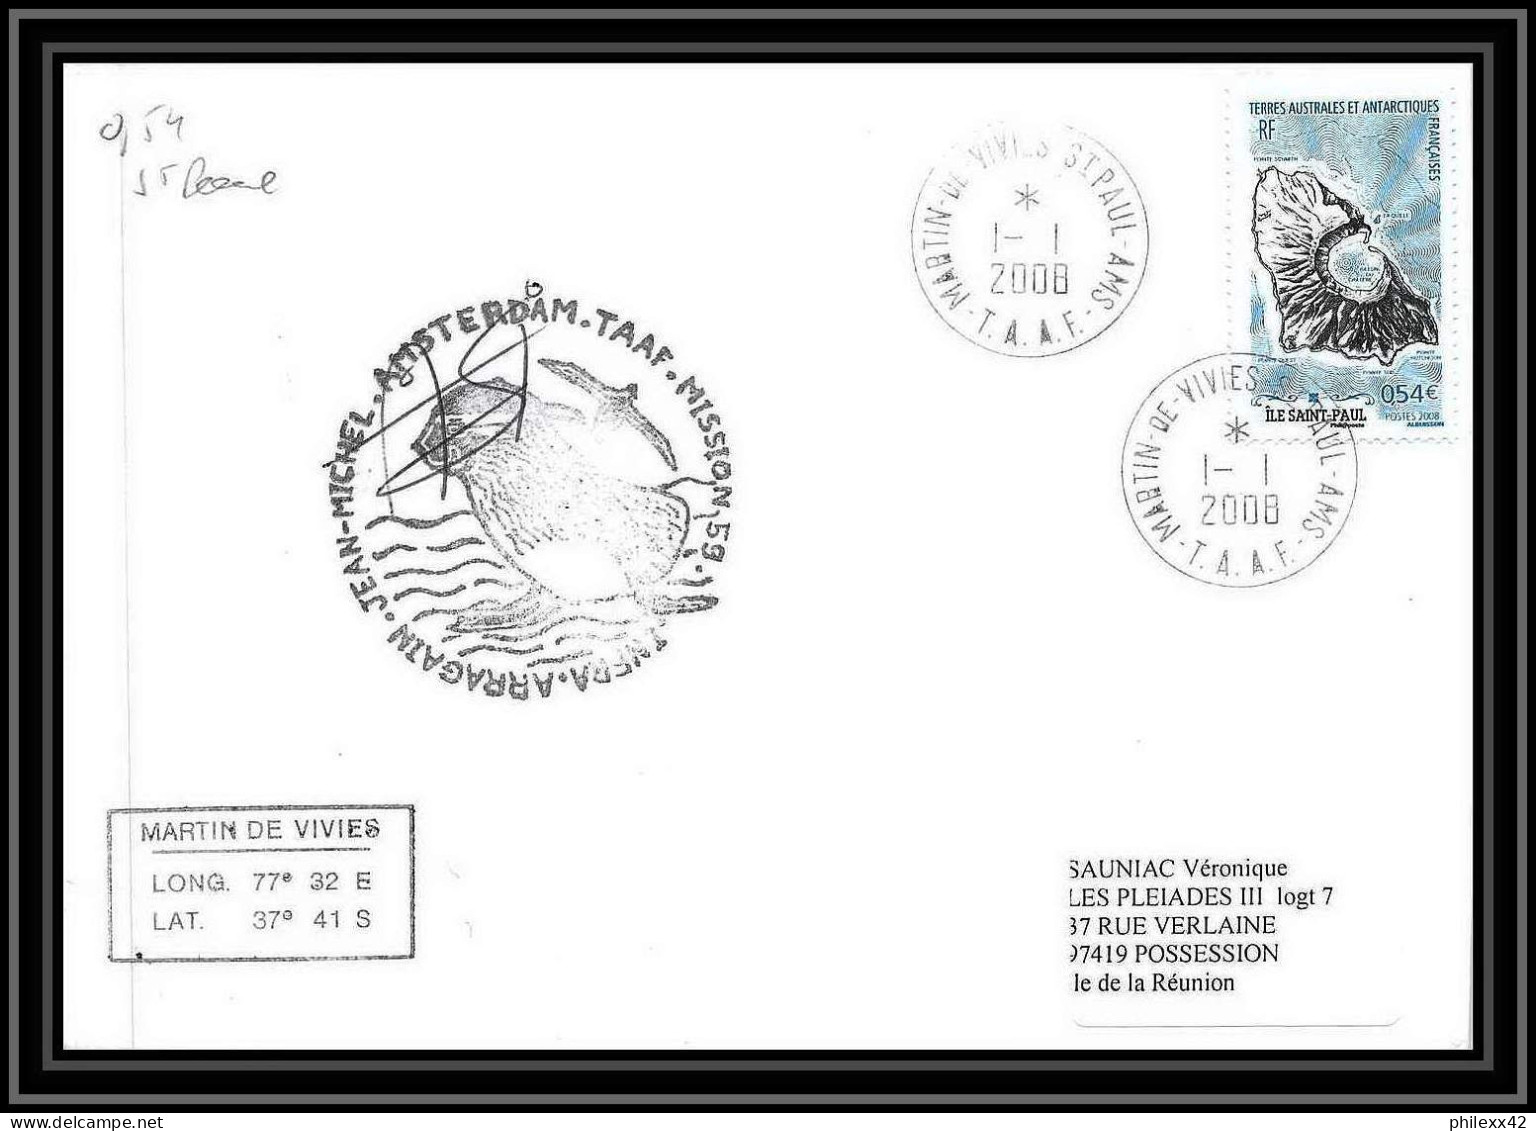 2765 ANTARCTIC Terres Australes TAAF Lettre Cover Dufresne 2 Signé Signed ST PAUL N°506 Mission 59 1/1/2008 - Antarktis-Expeditionen